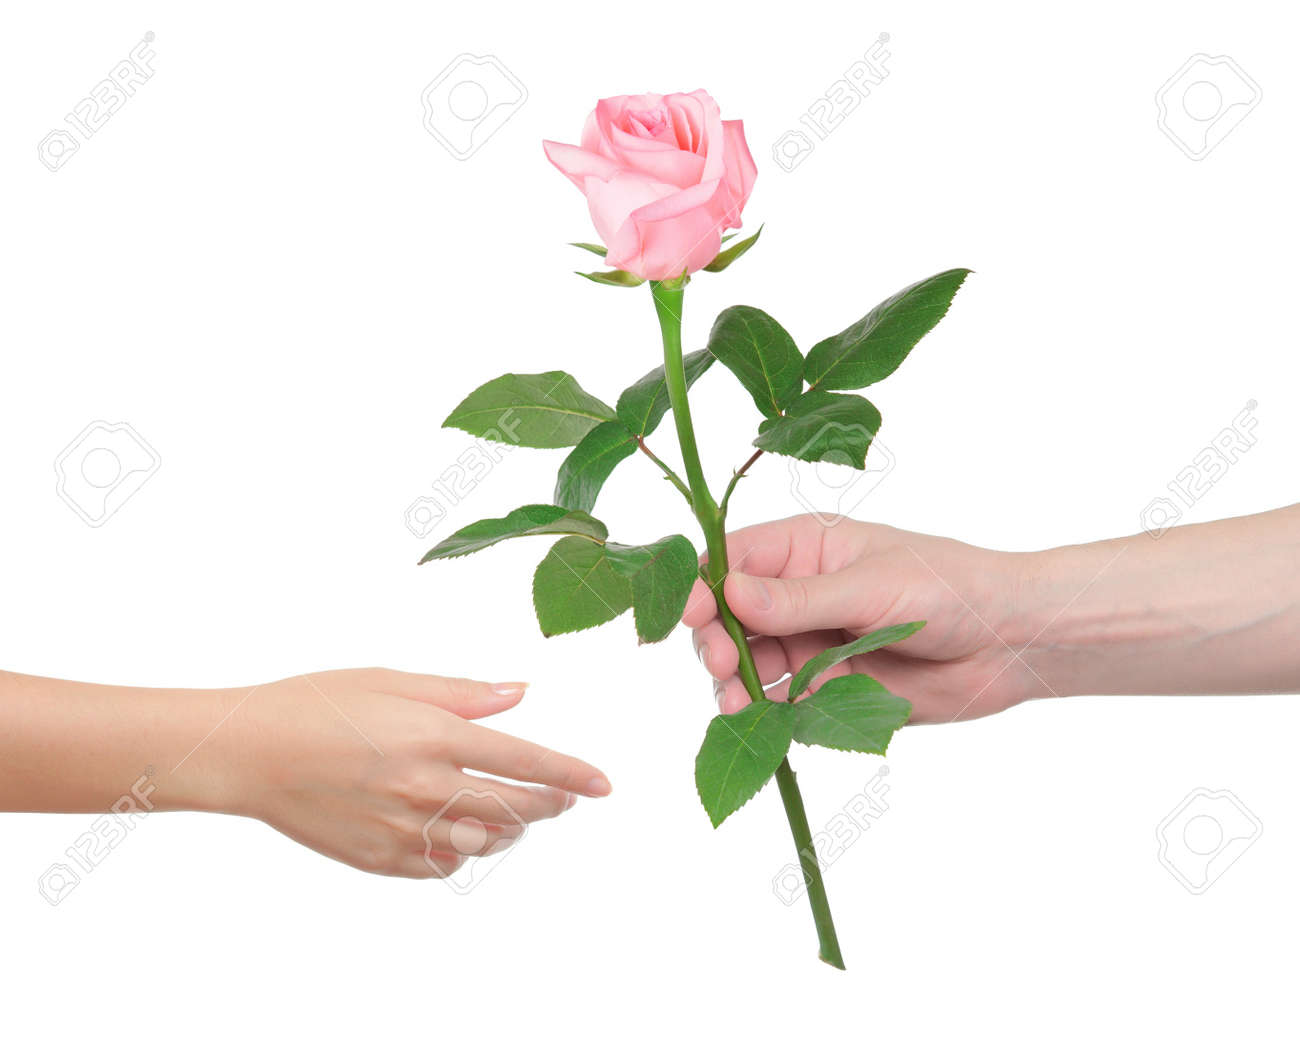 18440740-flower-as-a-gift-man-gives-the-woman-a-rose.jpg